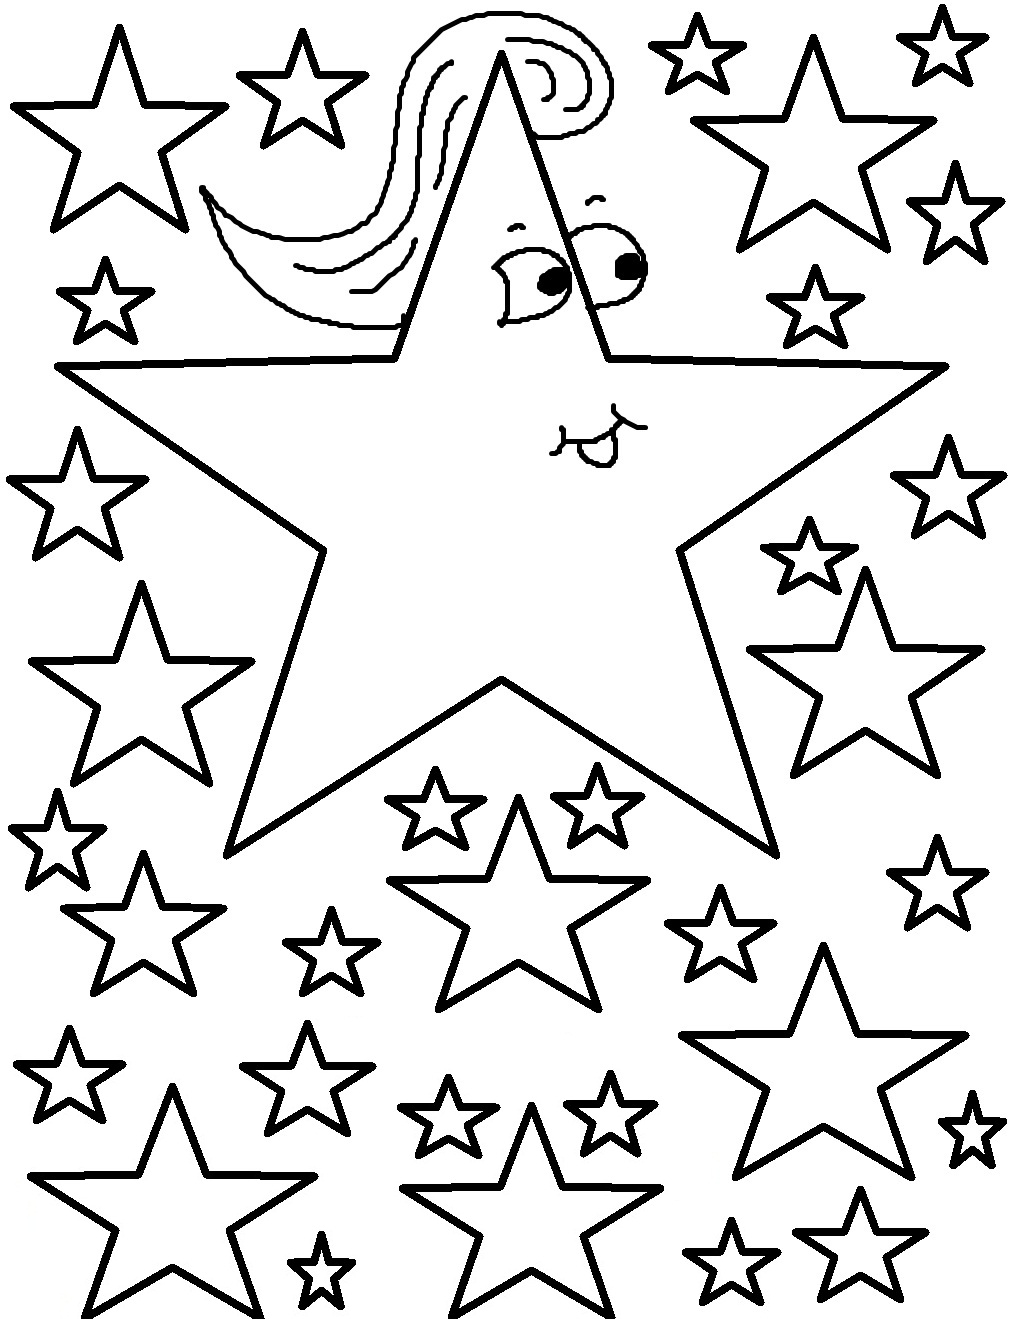  Free Printable Star Coloring Pages   9